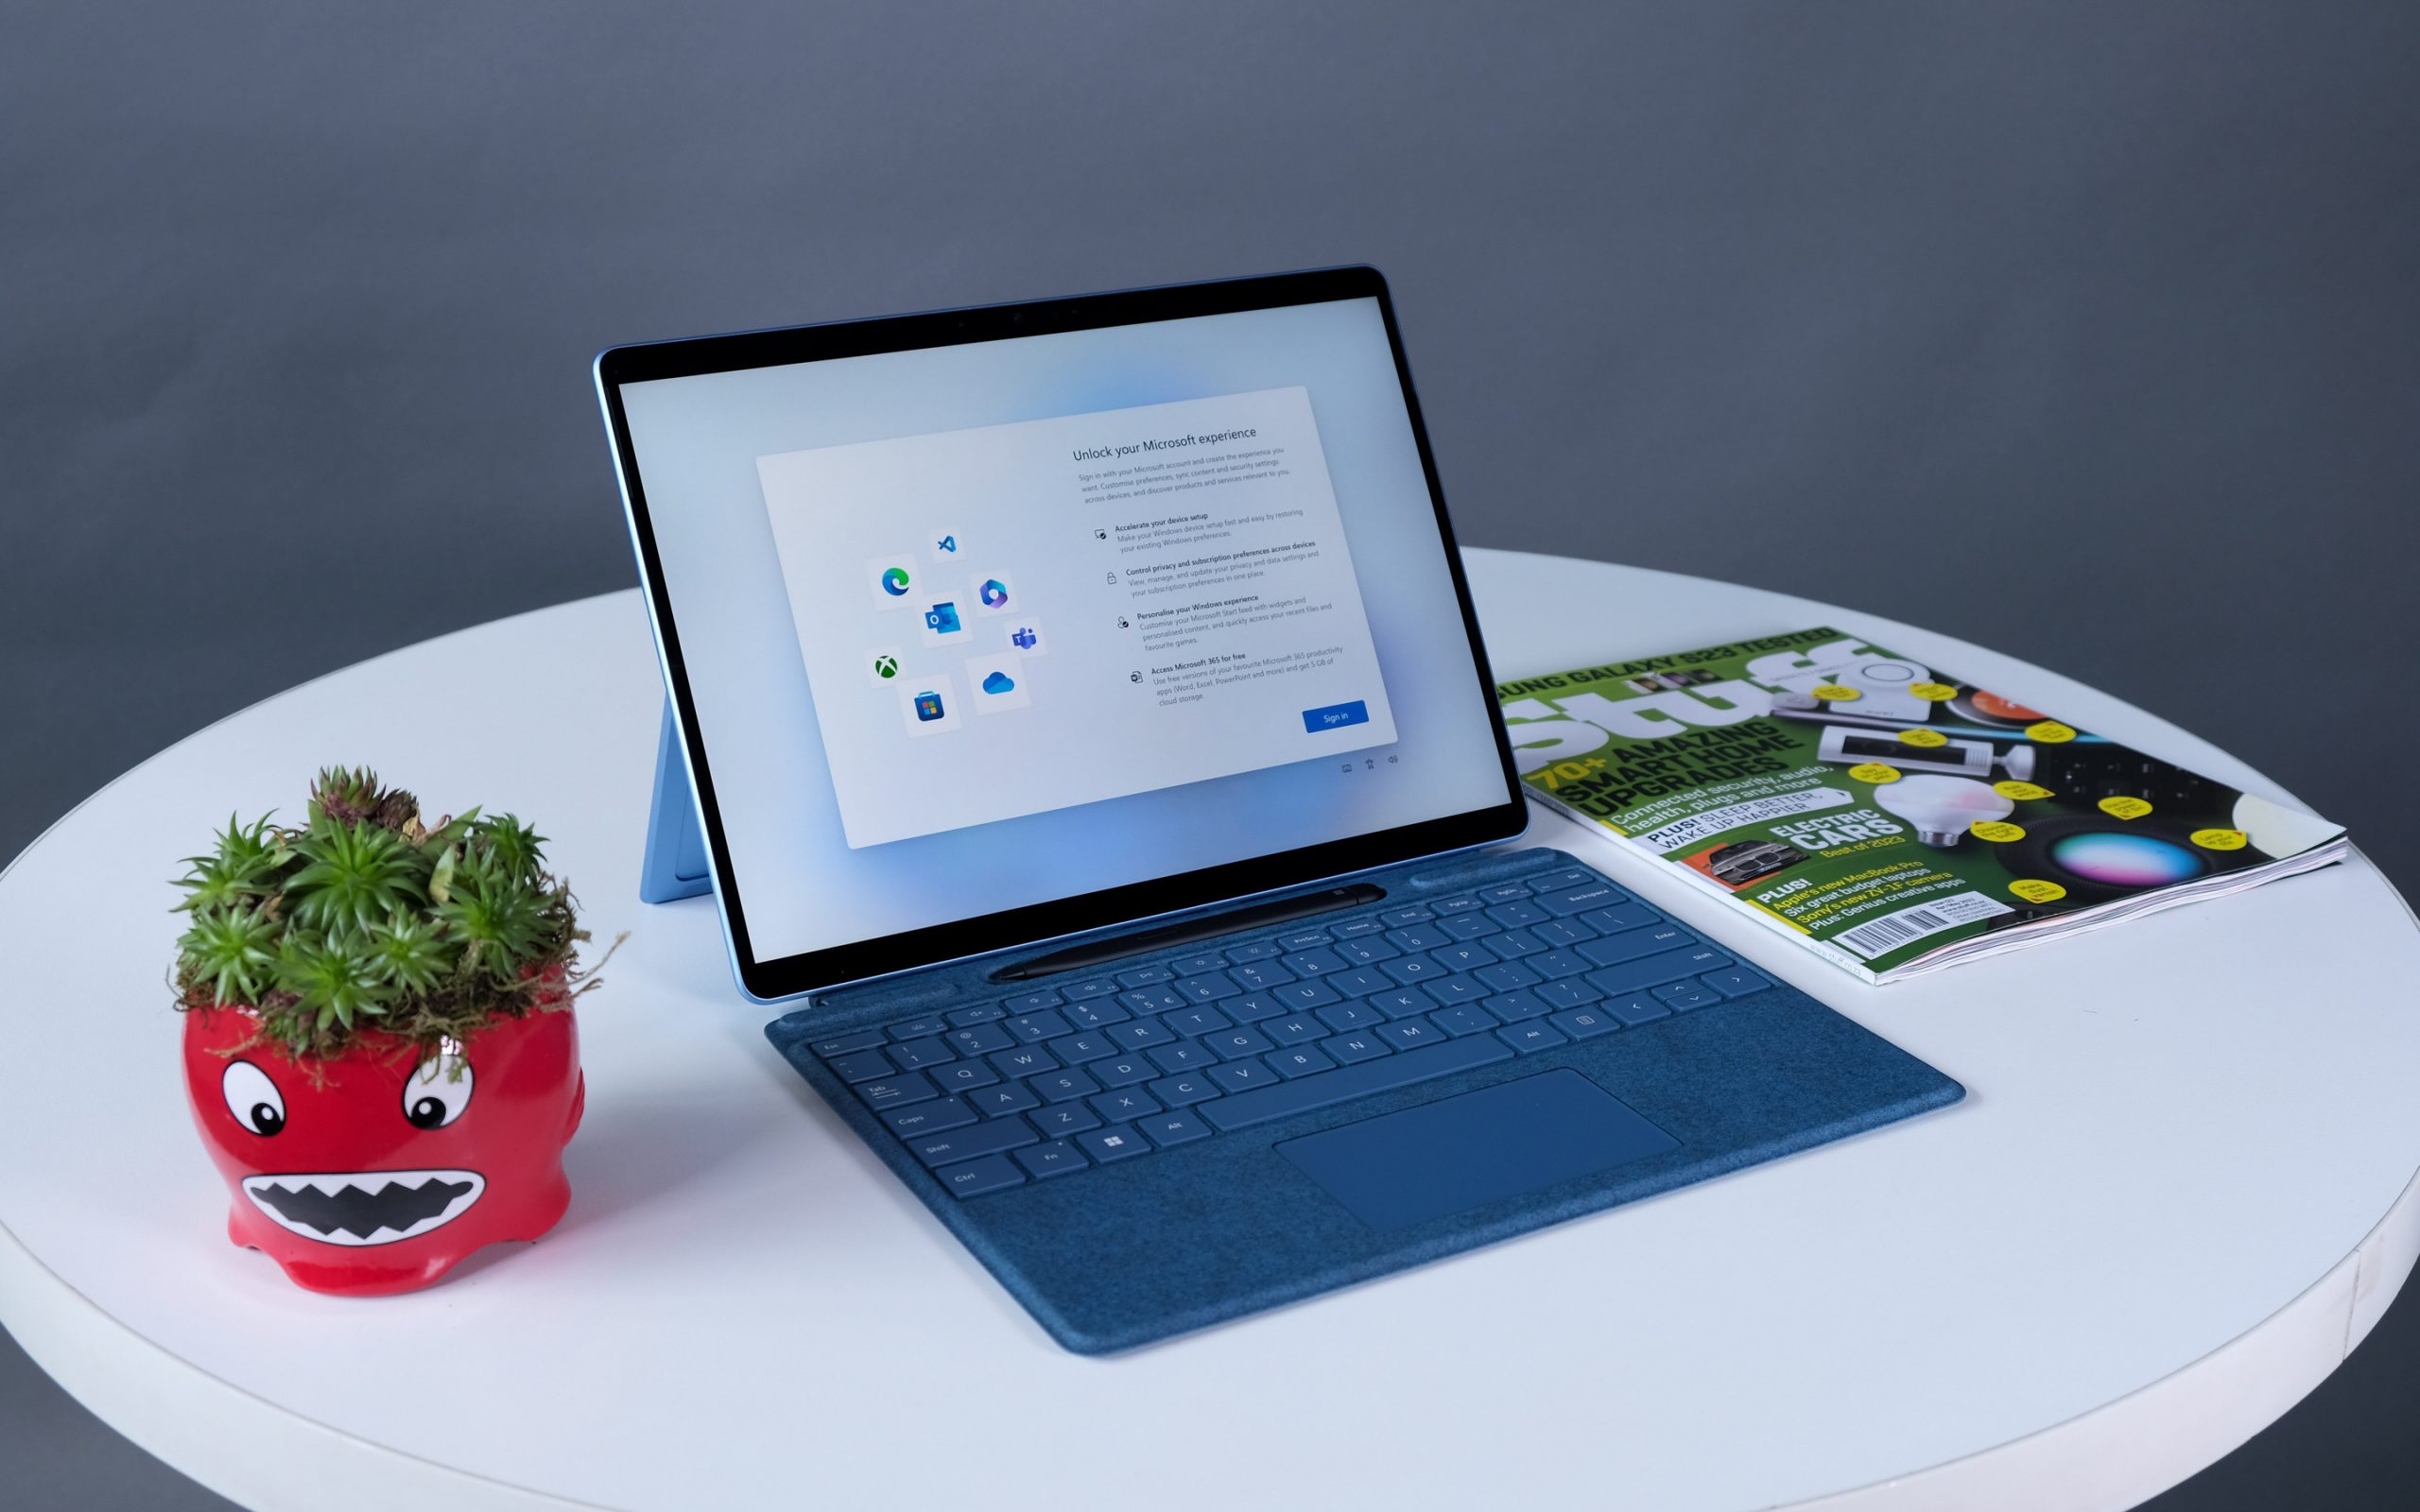 Microsoft STILL Doesn't Include a Keyboard With the New Surface Pro 5